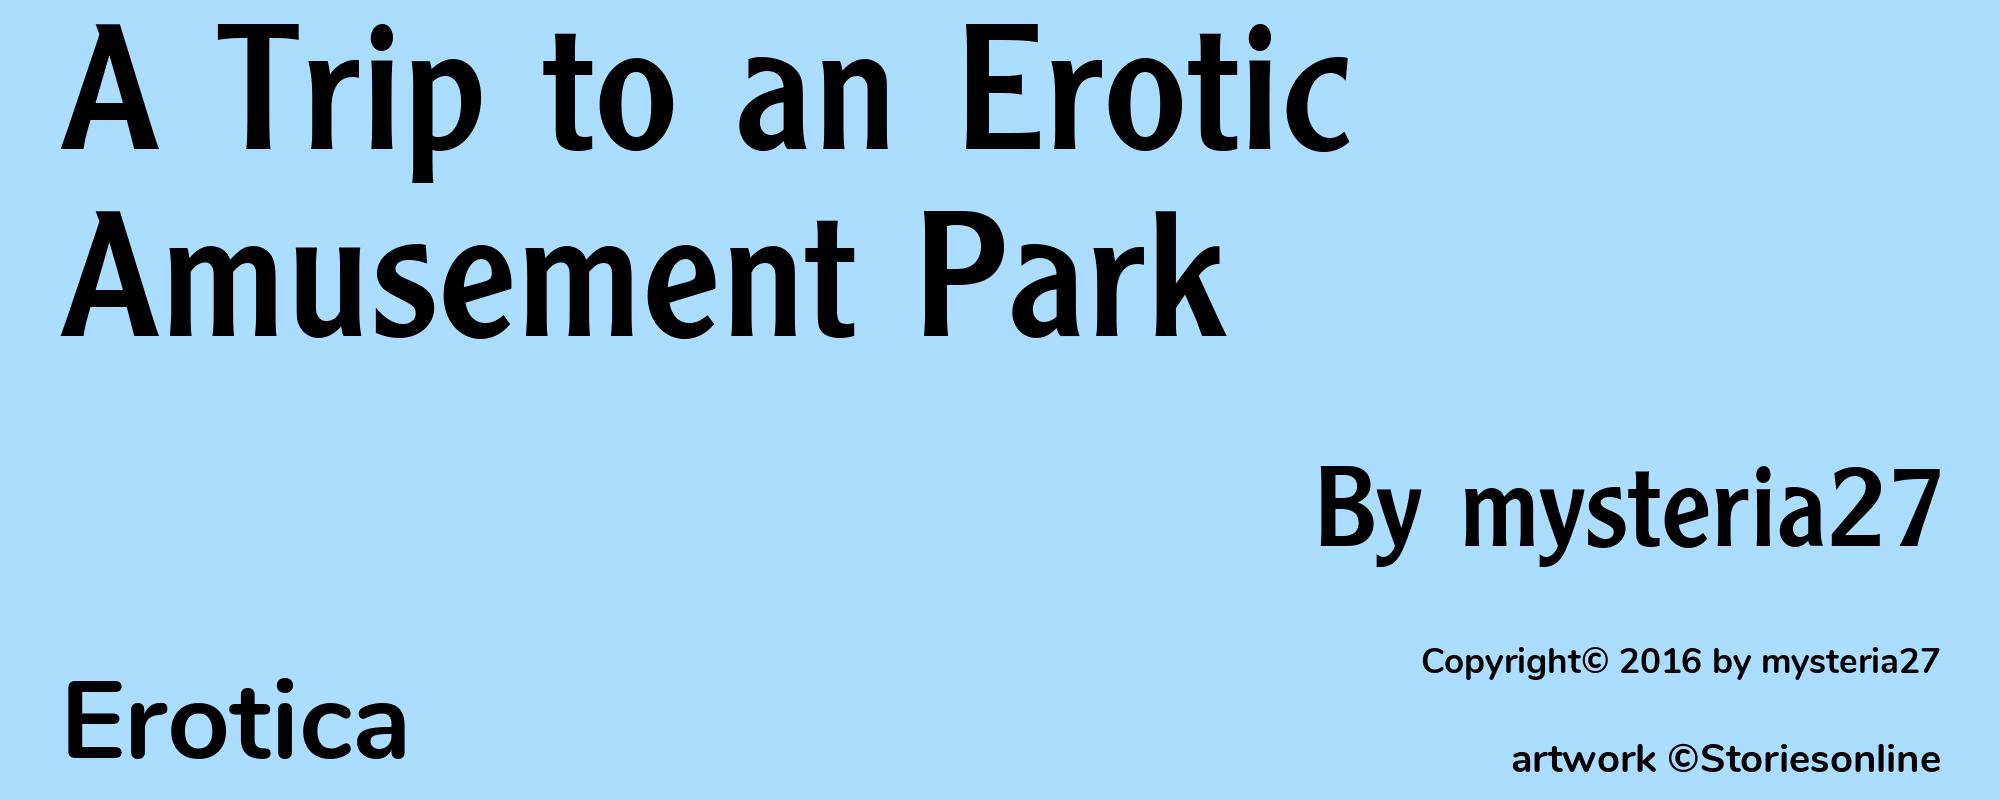 A Trip to an Erotic Amusement Park - Cover